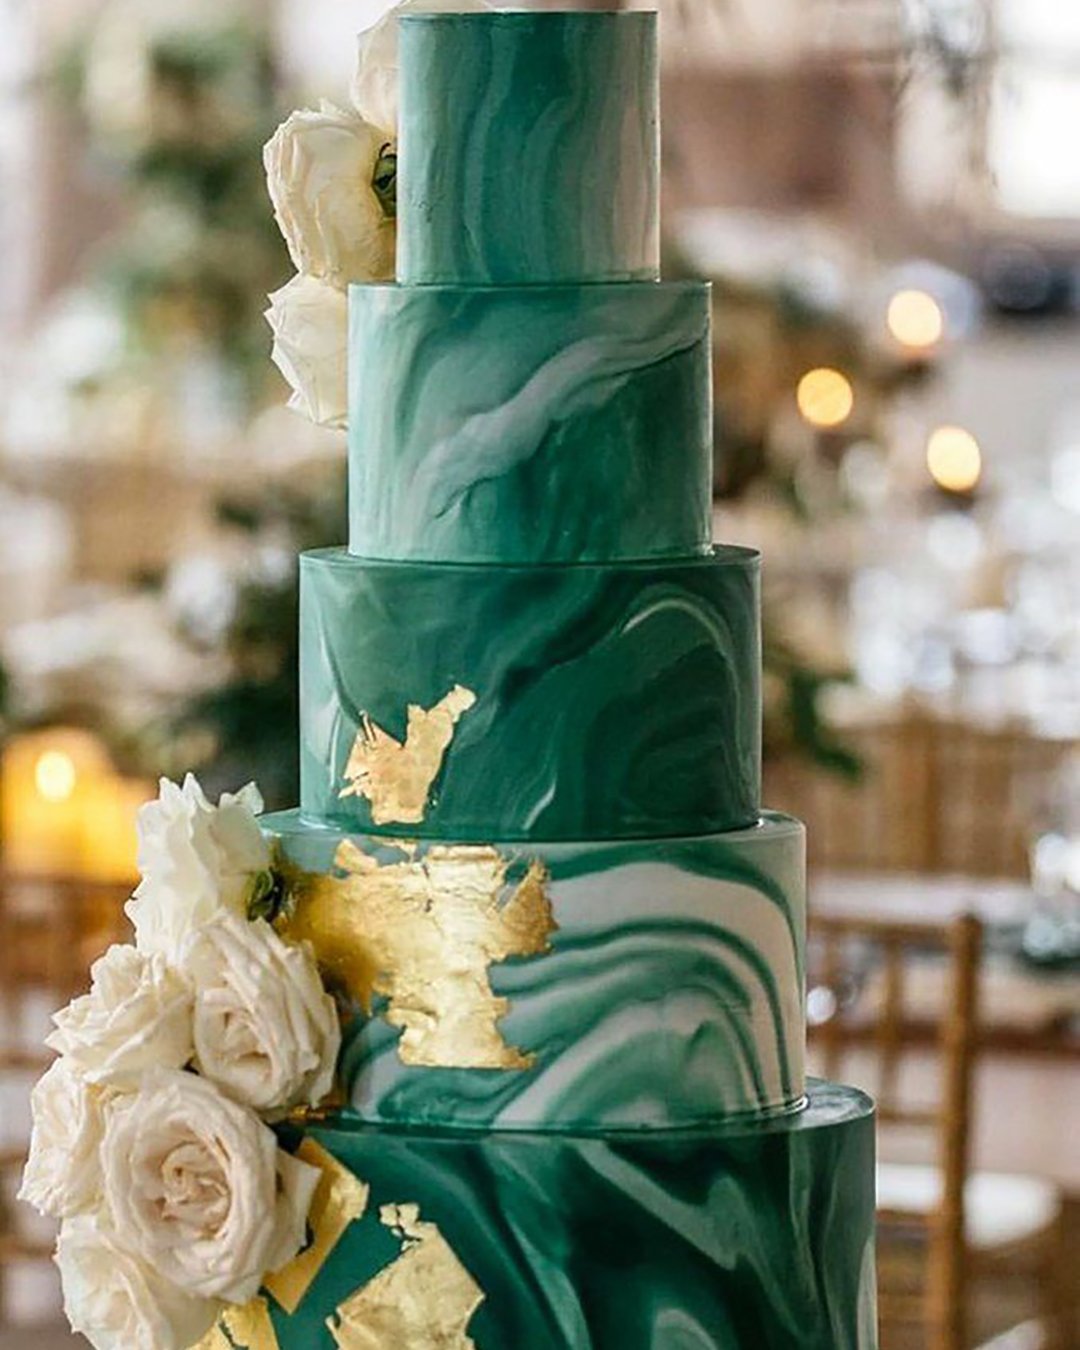 marble wedding cakes green cake with metallic absoluteevent